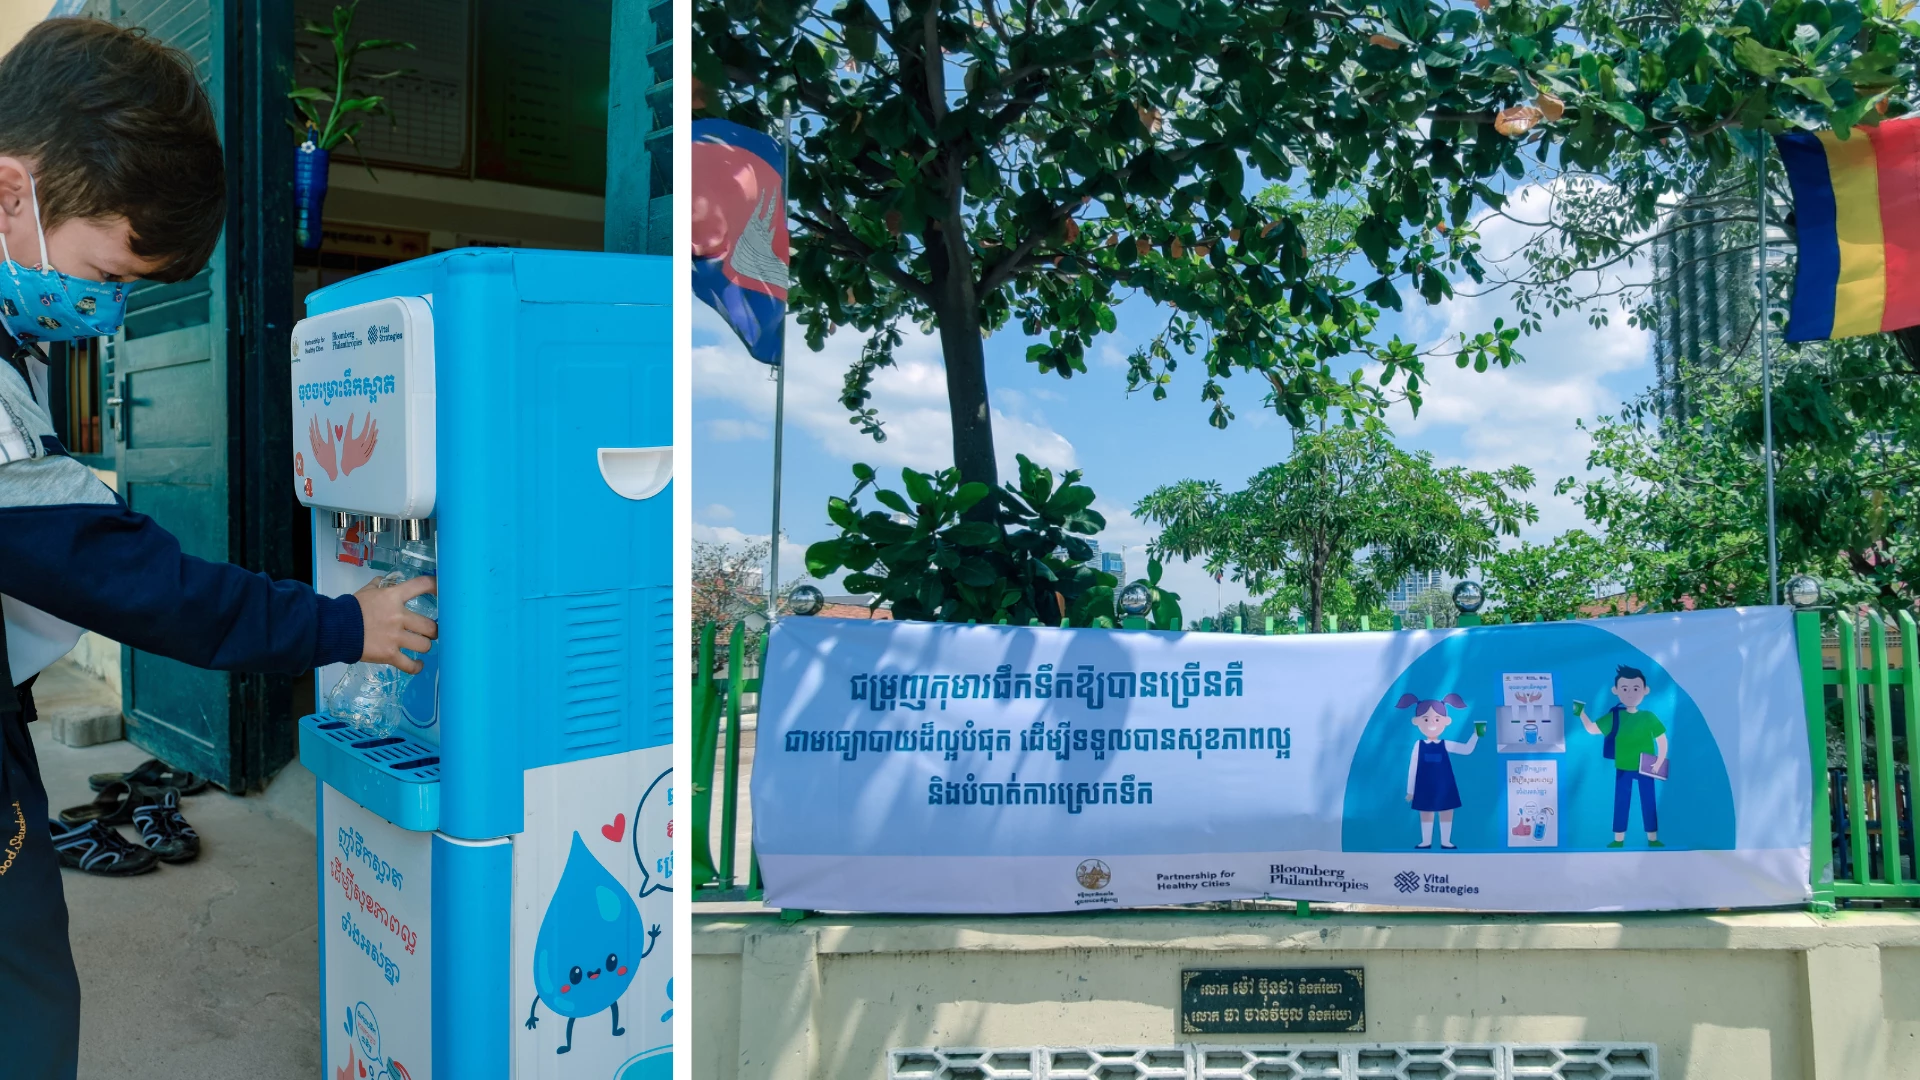 Phnom Penh is increasing schoolchildren’s access to safe drinking water through the installation of 100 dispensers in 92 public primary schools.